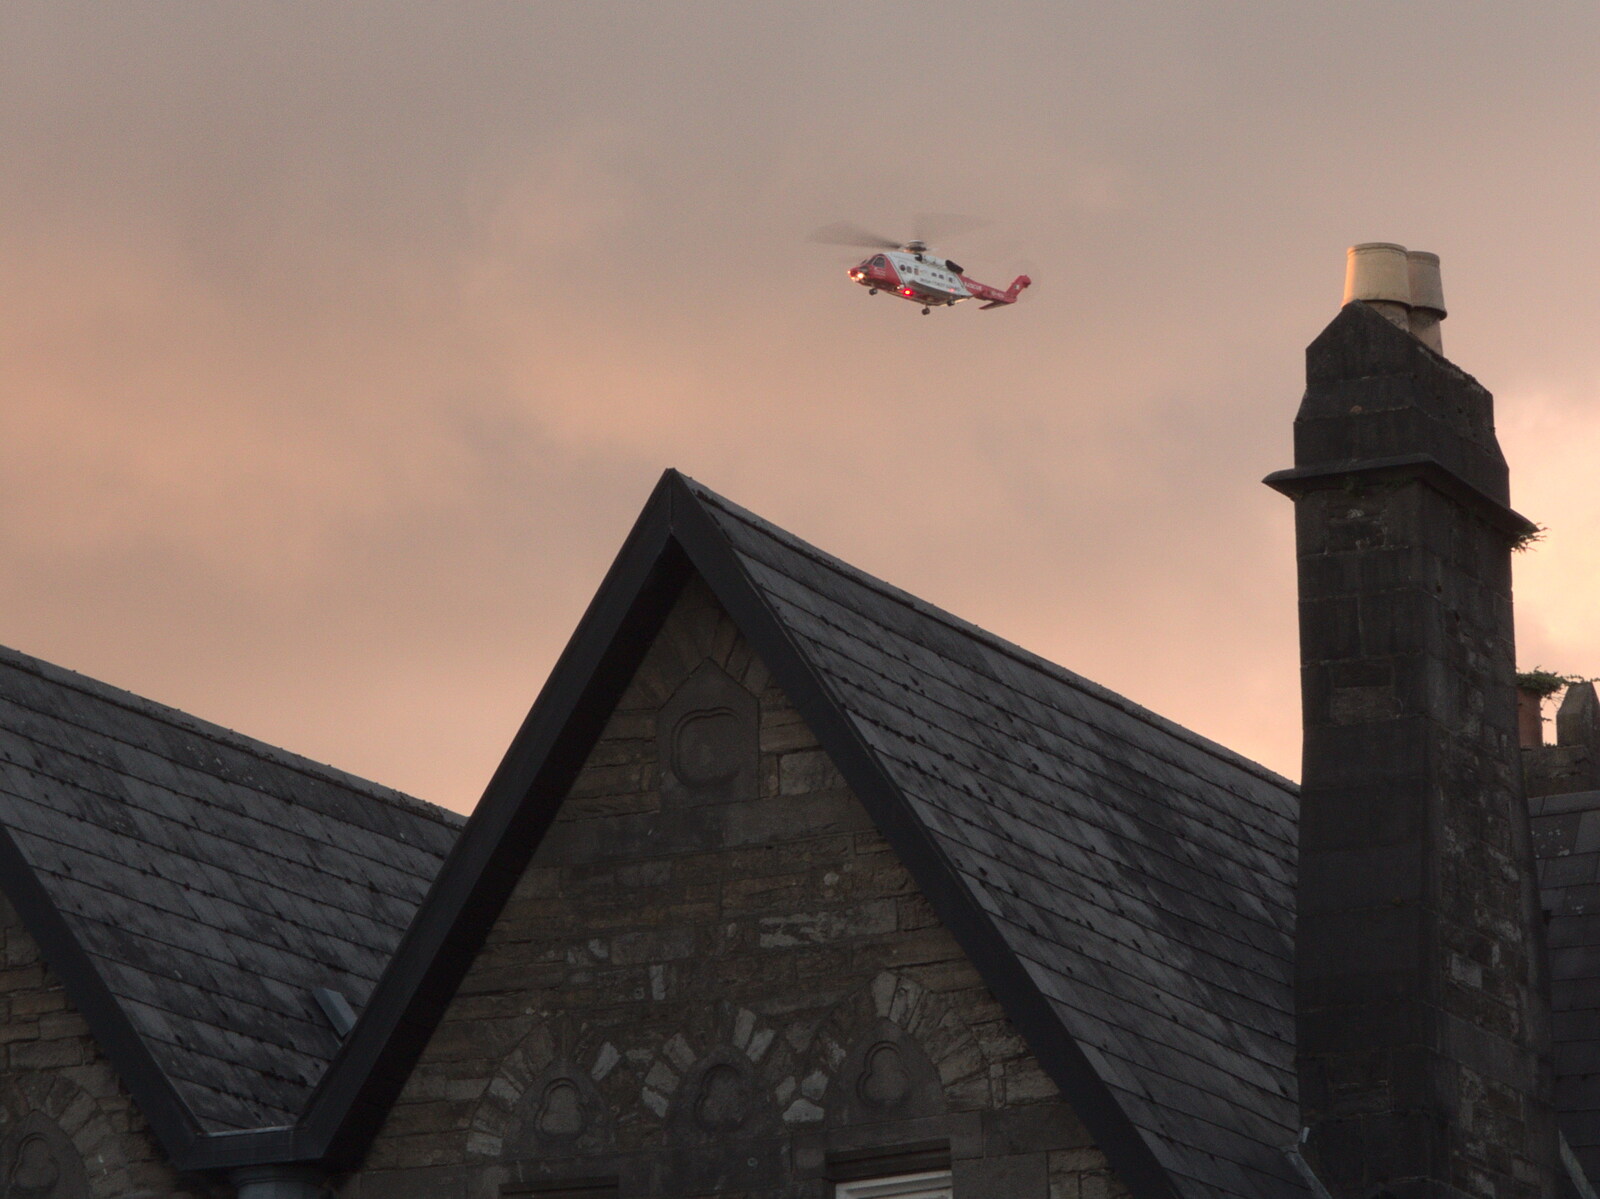 A Trip to Manorhamilton, County Leitrim, Ireland - 11th August 2021: The coastguard helicopter is out over Sligo